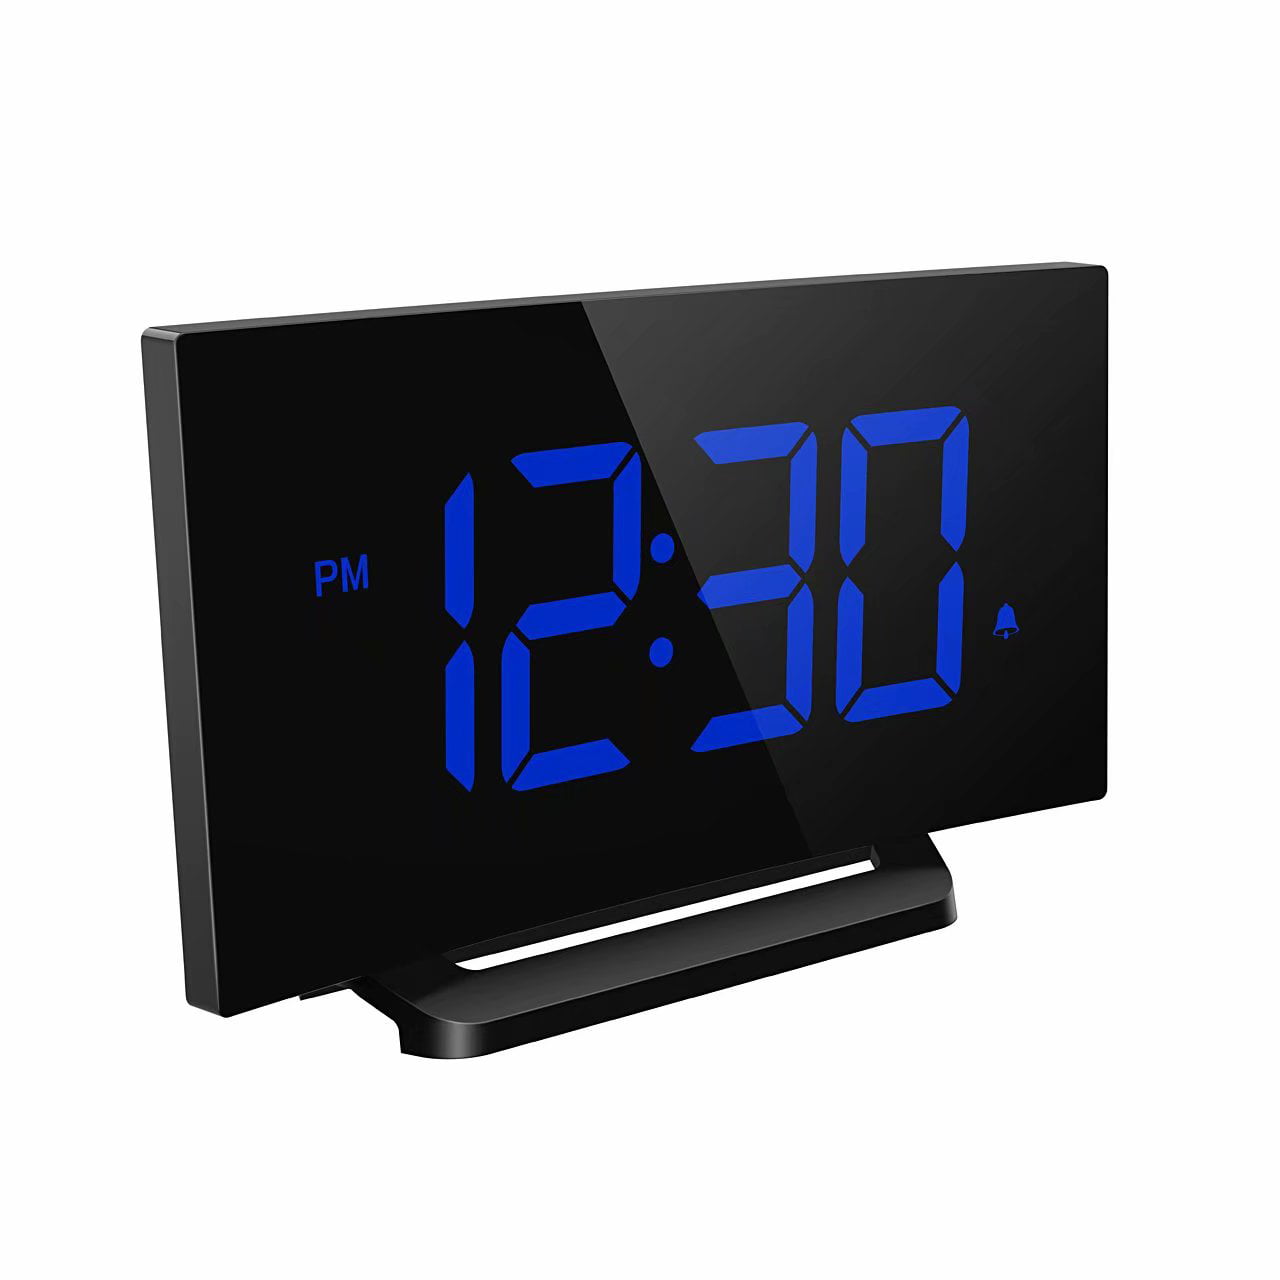 4 Adjustable Brightness,12/24 Hour and Snooze Function for Bedroom Livingroom Office 3.75 LED Dimmable Curved-Screen Alarm Clock with 3 Alarm Sounds Mpow Digital Alarm Clock Power Adapter Included